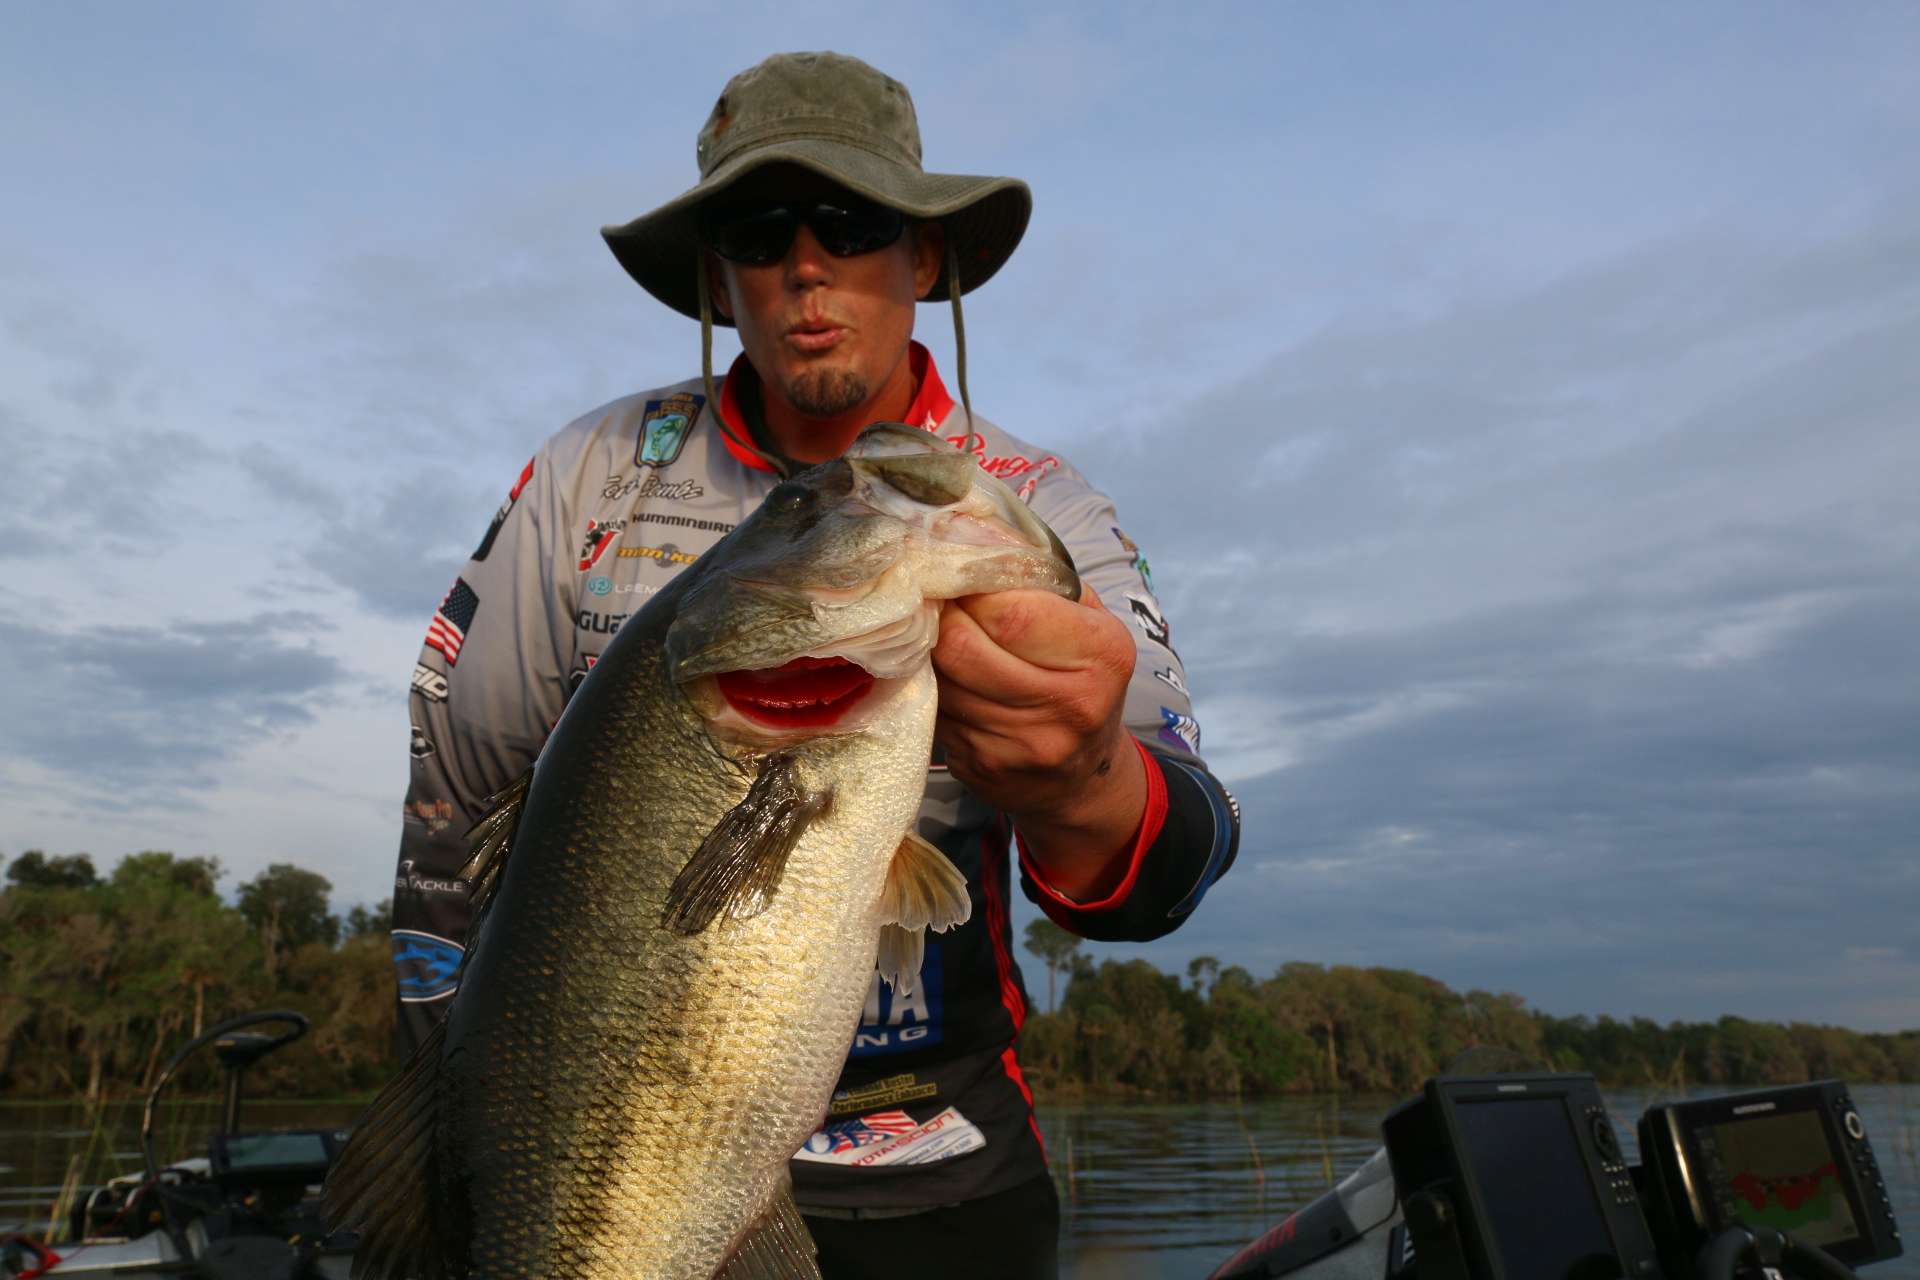 Keith Combs, one of three Texans to make the top 12 in each of the previous three St. Johns Elite events, was closest to going four for four by taking 14th. He sandwiched two 19-14 bags, the latter helped by this hawg, with a disappointing 9-4. Todd Faircloth (32nd) and Alton Jones (42nd) missed making their fourth and final days here by a larger margin.